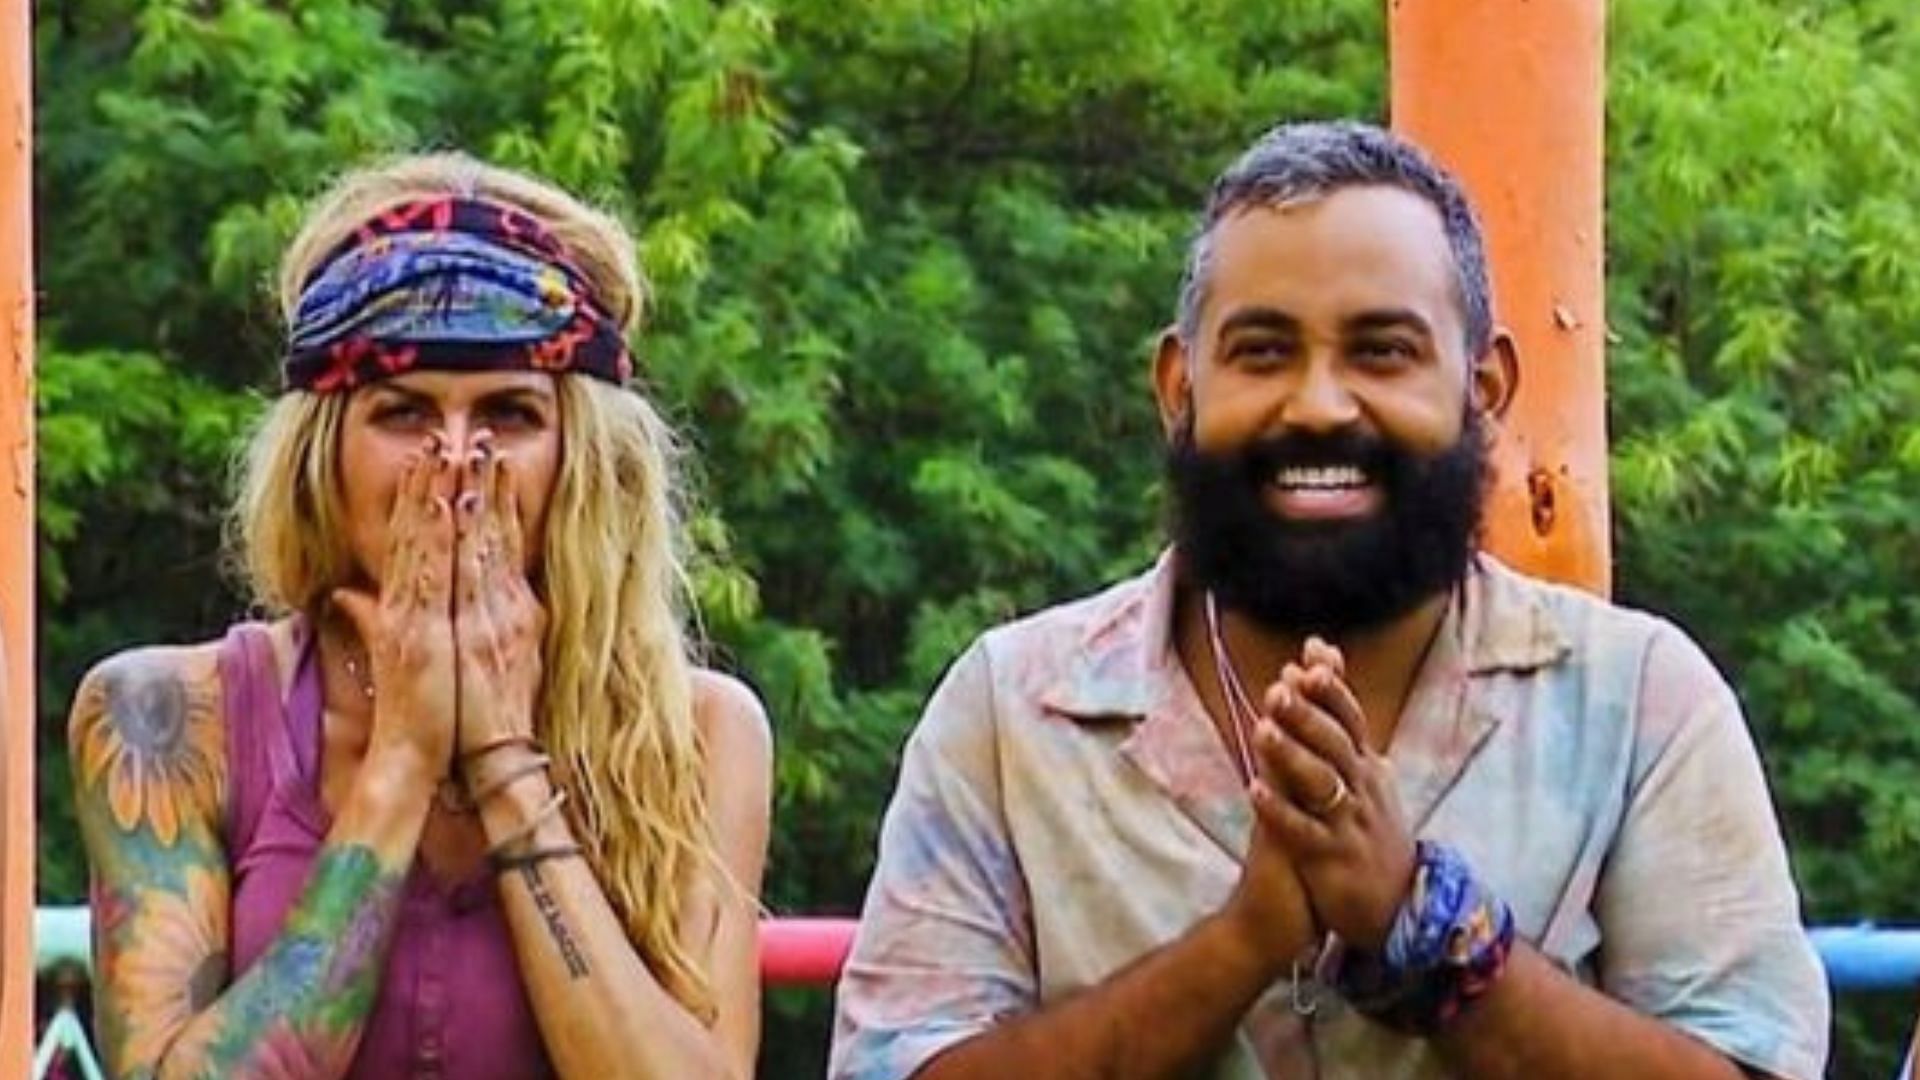 Yam Yam plans to vote out Carolyn on Survivor